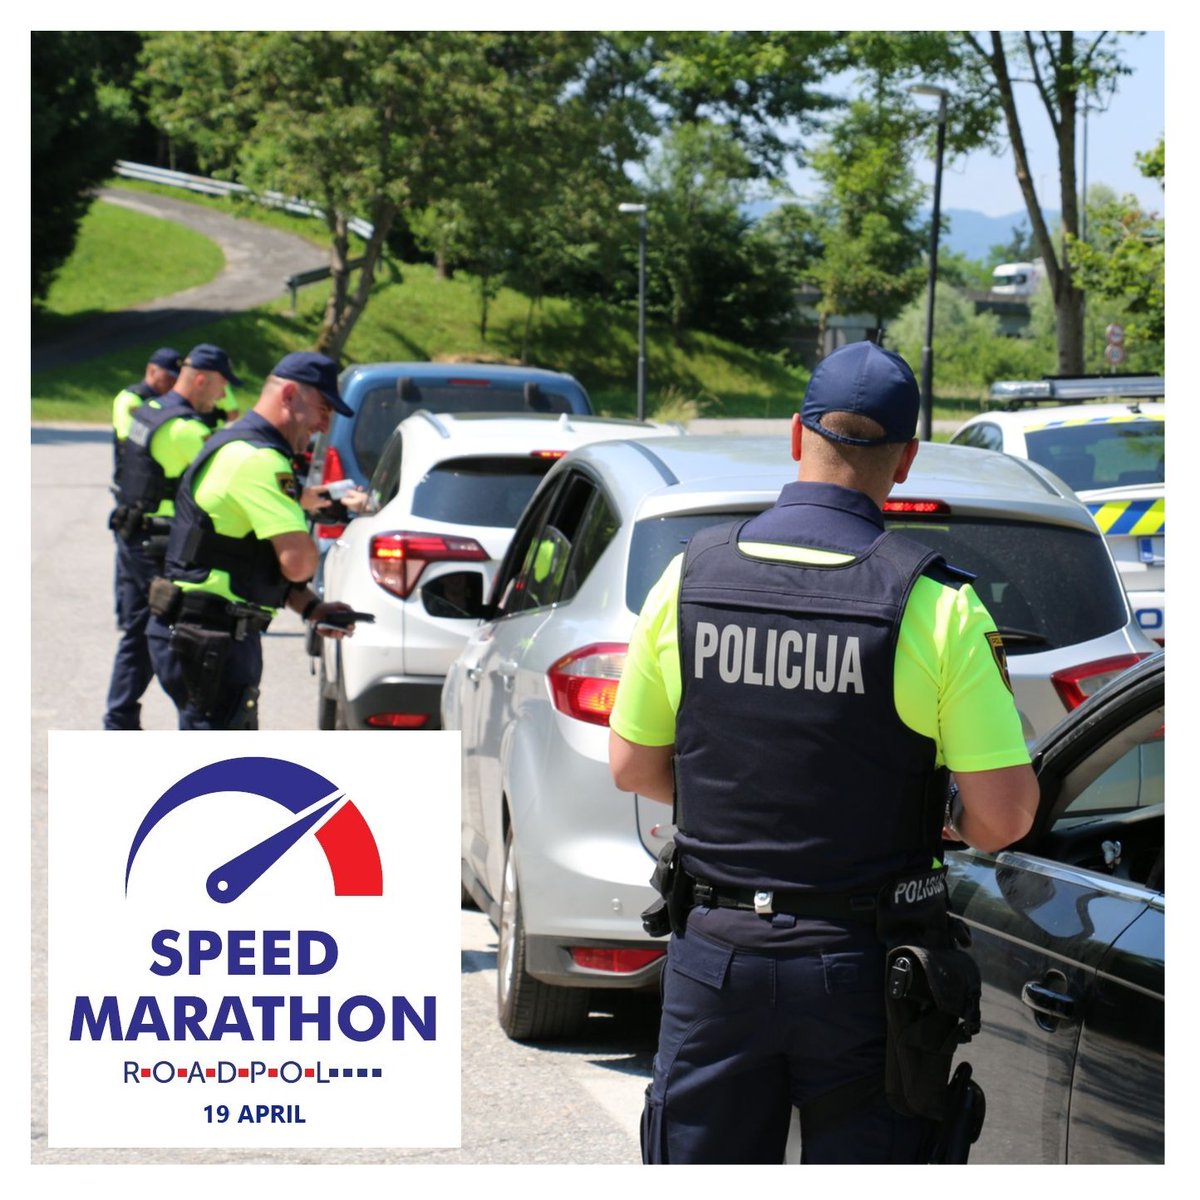 👮‍♂️ 👮‍♀️ All over Europe from 🇵🇹 Portugal to 🇸🇮 Slovenia speeding is the focus of the most massive police operation 🚔 Culminating with the #SpeedMarathon this Friday 🚨 Quite simple: You stop slower and longer when you speed! #police #roadsafety